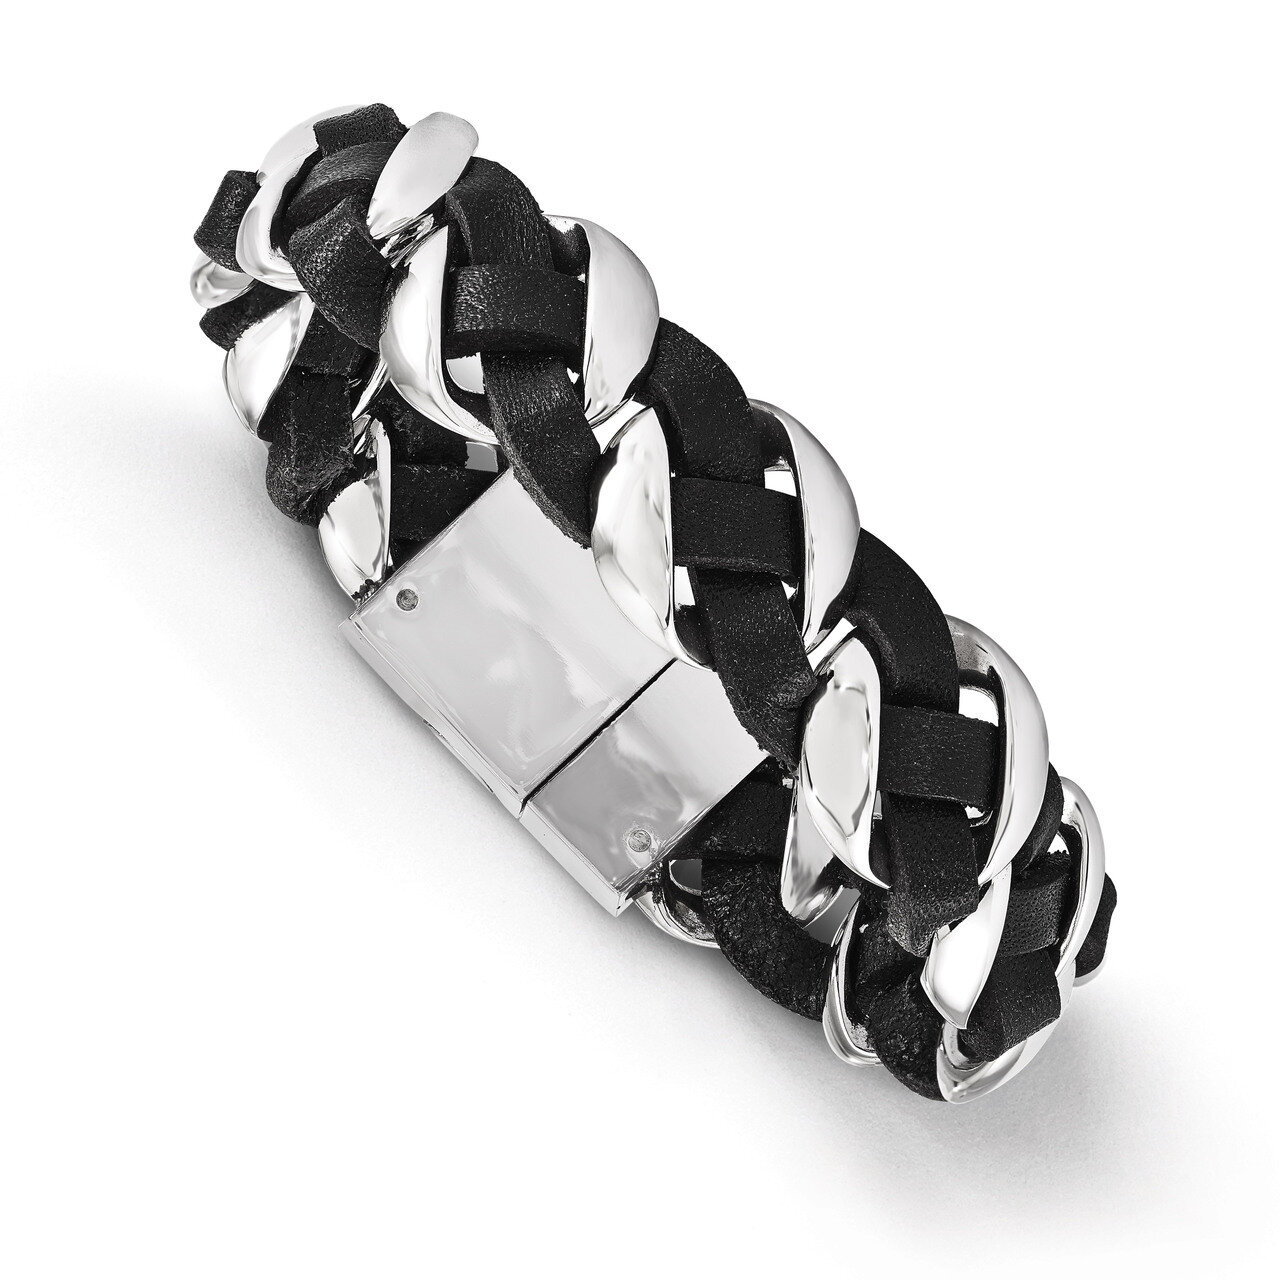 Polished Leather Braided Bracelet - Stainless Steel SRB1745-8